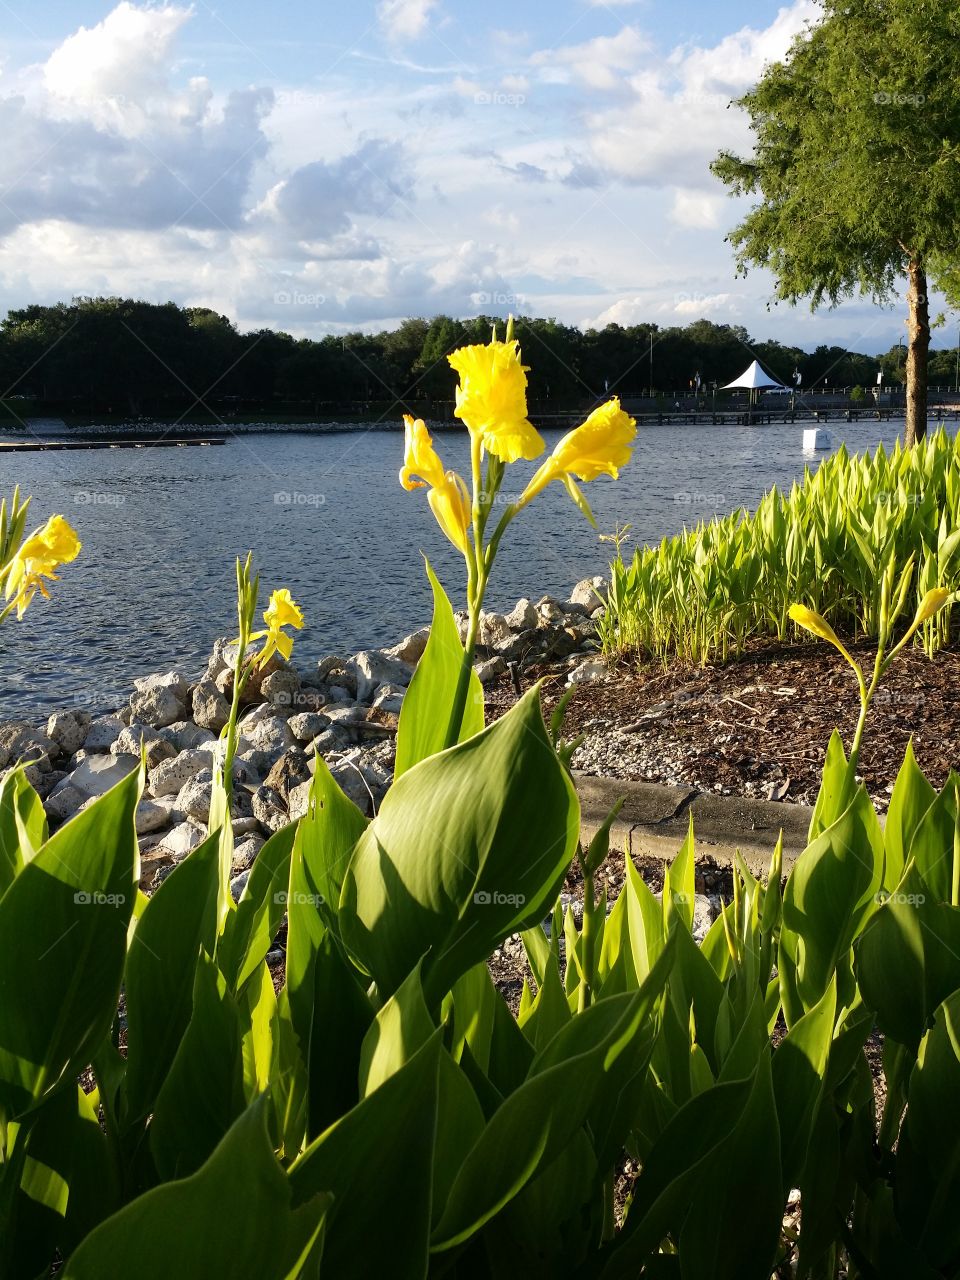 Flower By The Rocks. Took this at Cranes Roost in Altamonte Springs Florida